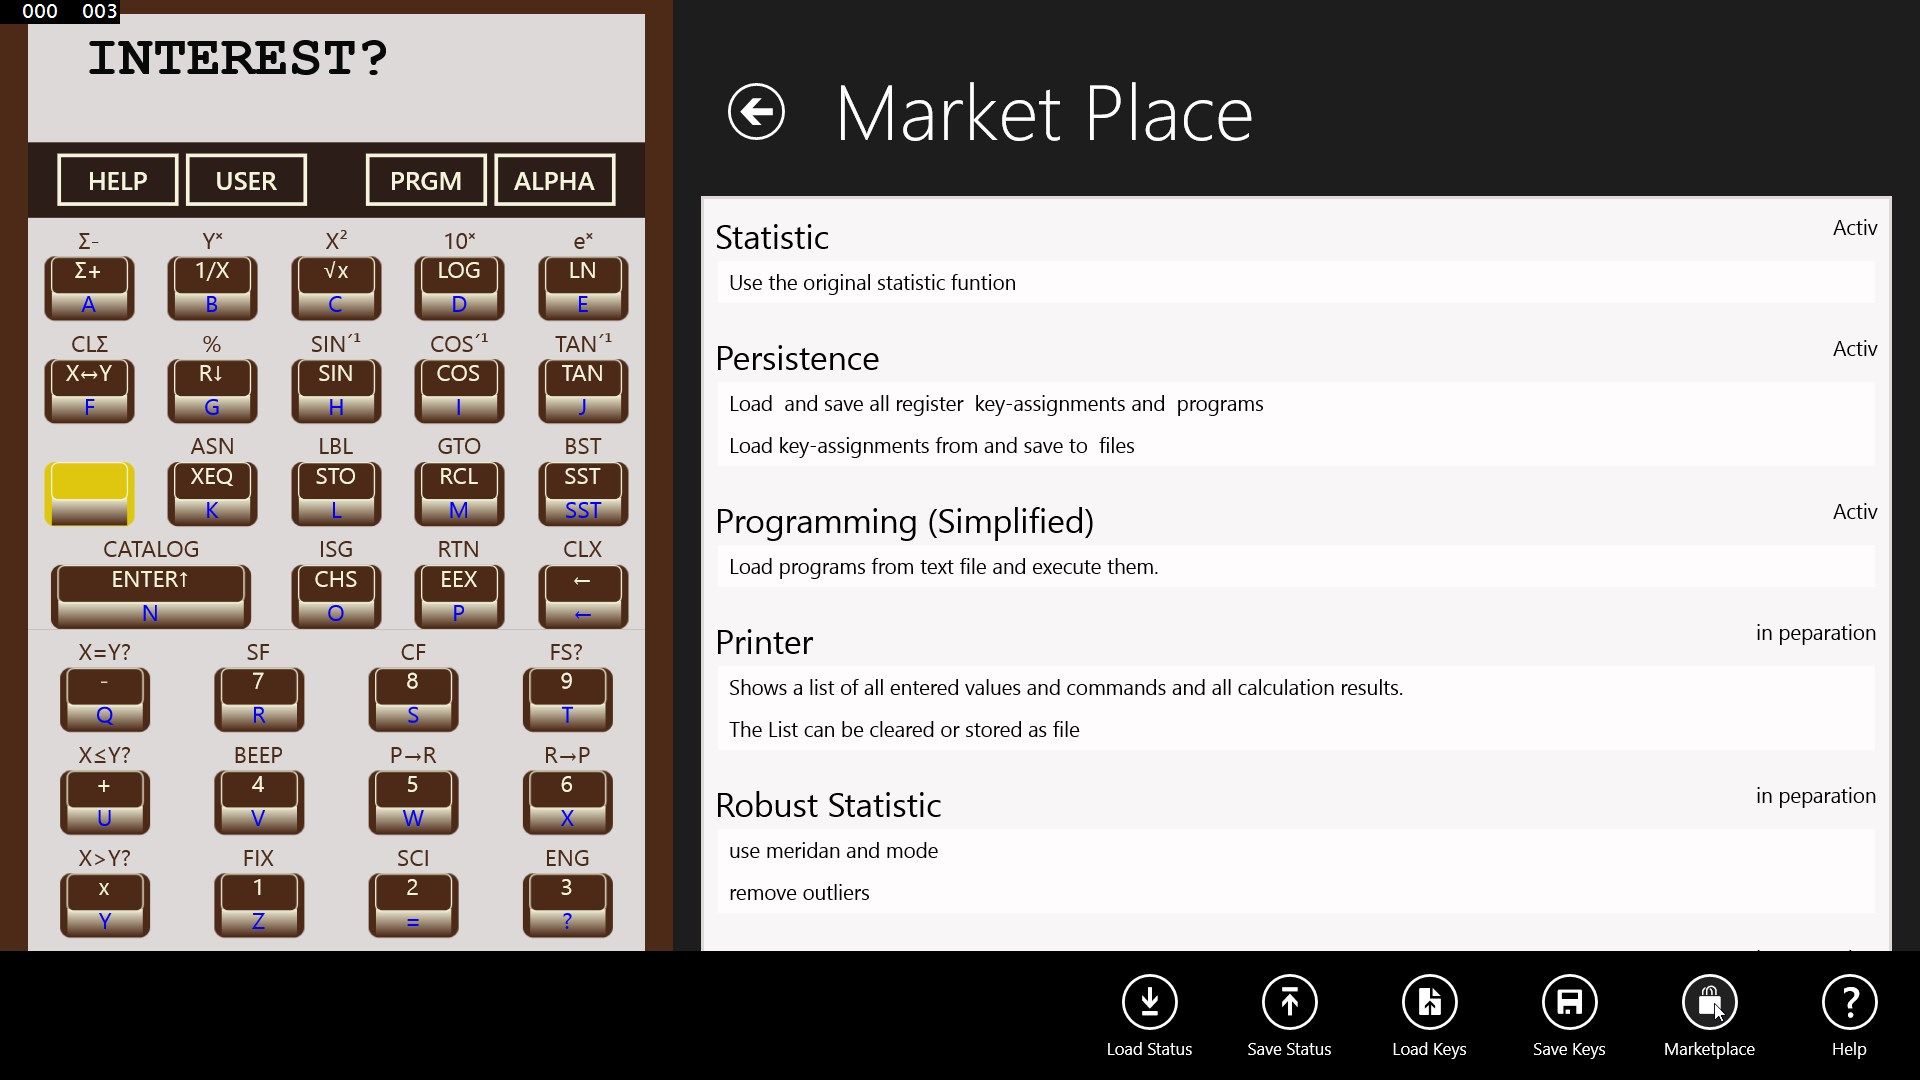 And via the Market Place additional functionality can be bought